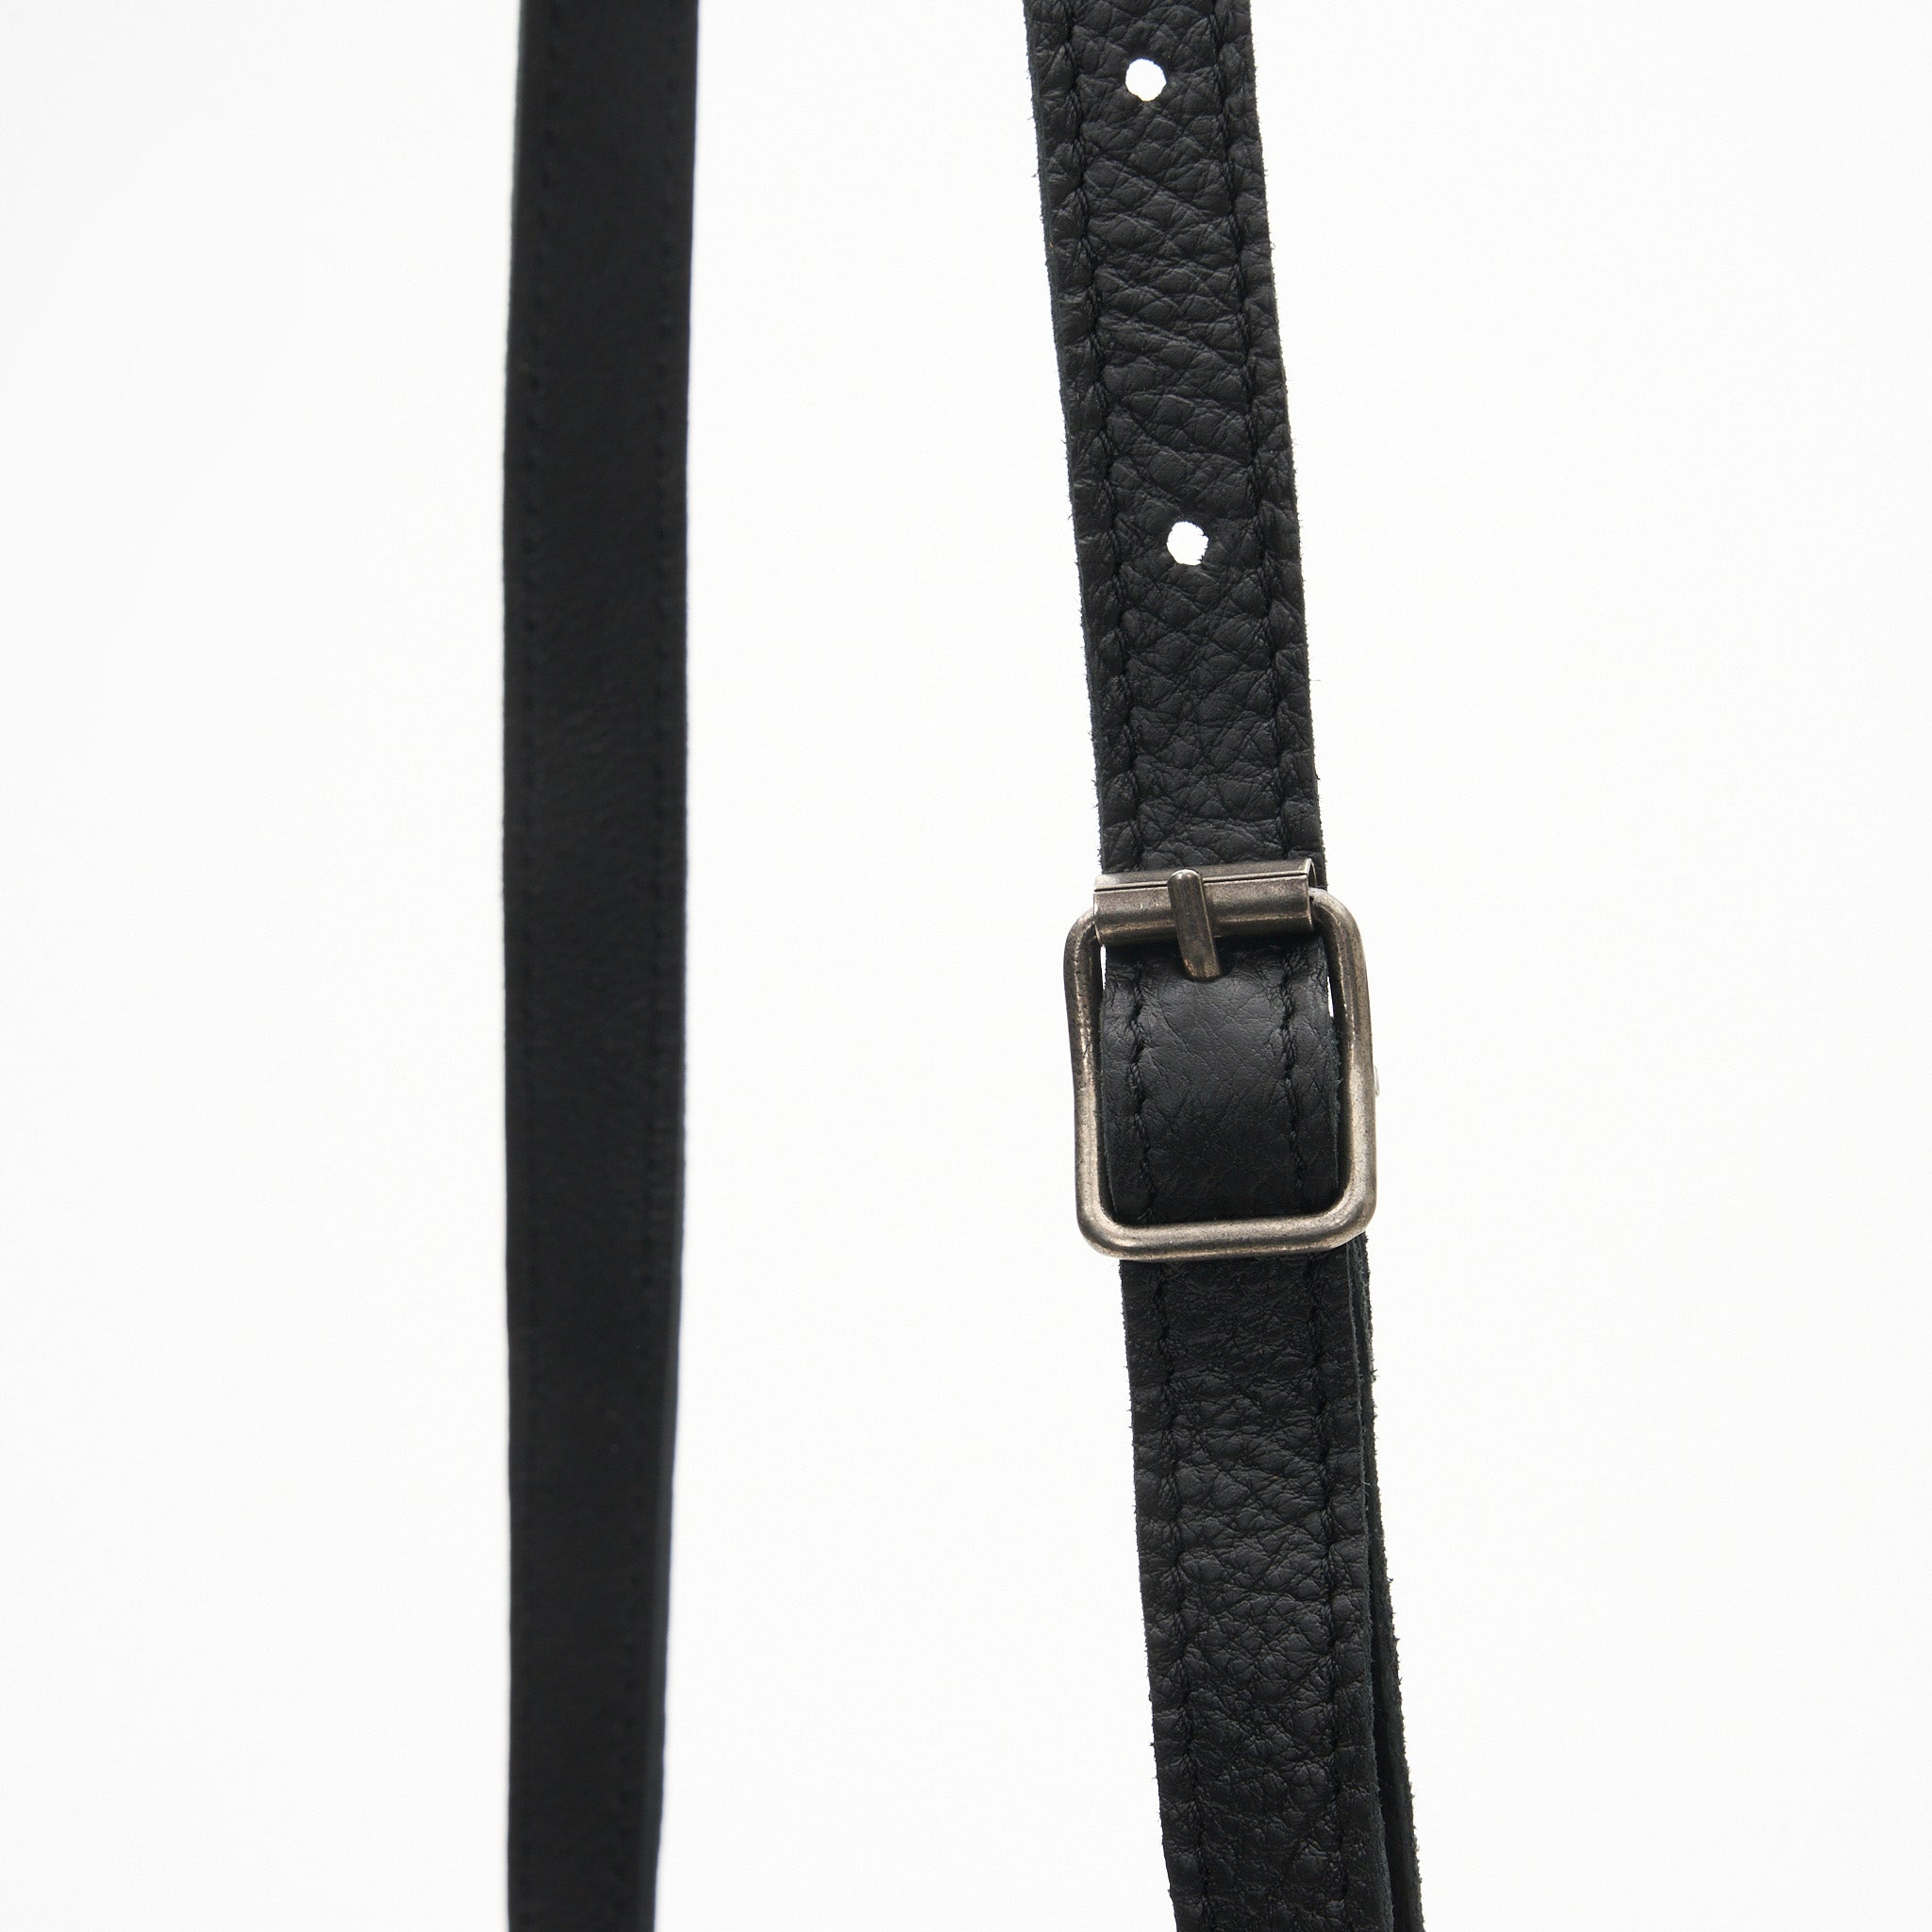 Strap and hardware details